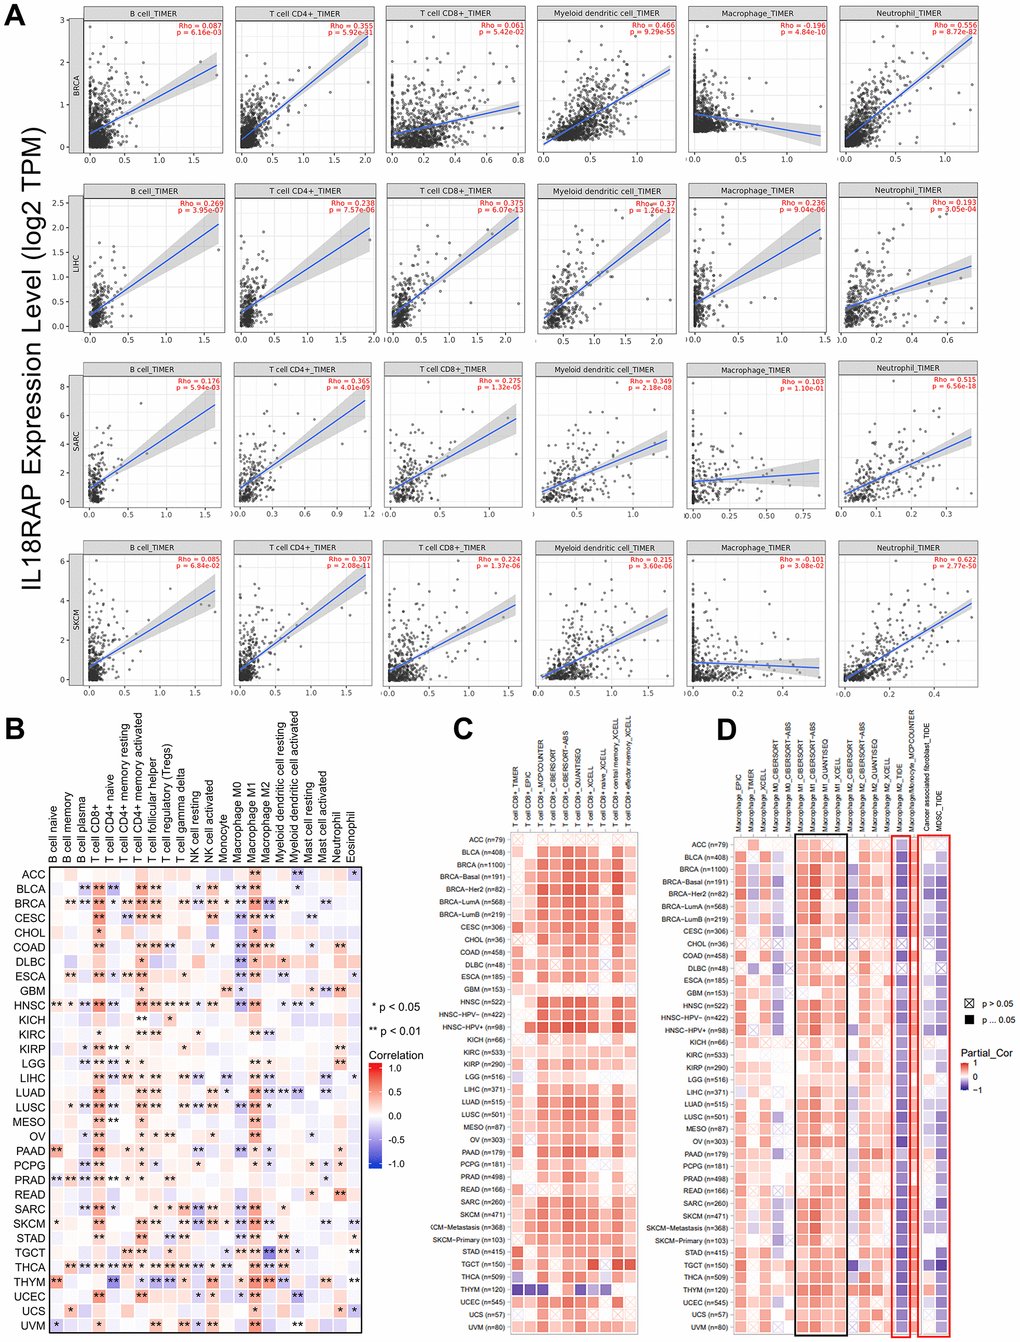 The correlation analysis of IL18RAP expression and immune cells infiltration in pan-cancer. (A) The relationship between mRNA expression level of IL18RAP and infiltration of CD4+T cells, B cells, macrophages, CD8+T cells, dendritic cells and neutrophils in BRCA, LIHC, SARC, and SKCM was examed using TIMER algorithm. (B) Using the CIBERSORT algorithm, the relationship between IL18RAP expression and the infiltration of 22 different immune cell types in pan-cancer was determined. (C, D). Correlation of IL18RAP expression with the infiltration of CD8+T cells (C) and different kinds of macrophages (D) obtained from TIMER2.0 database. The results of M1 macrophages were circled in the black box. The results of M2 macrophages, CAFs, and MDSCs were circled in the red box.